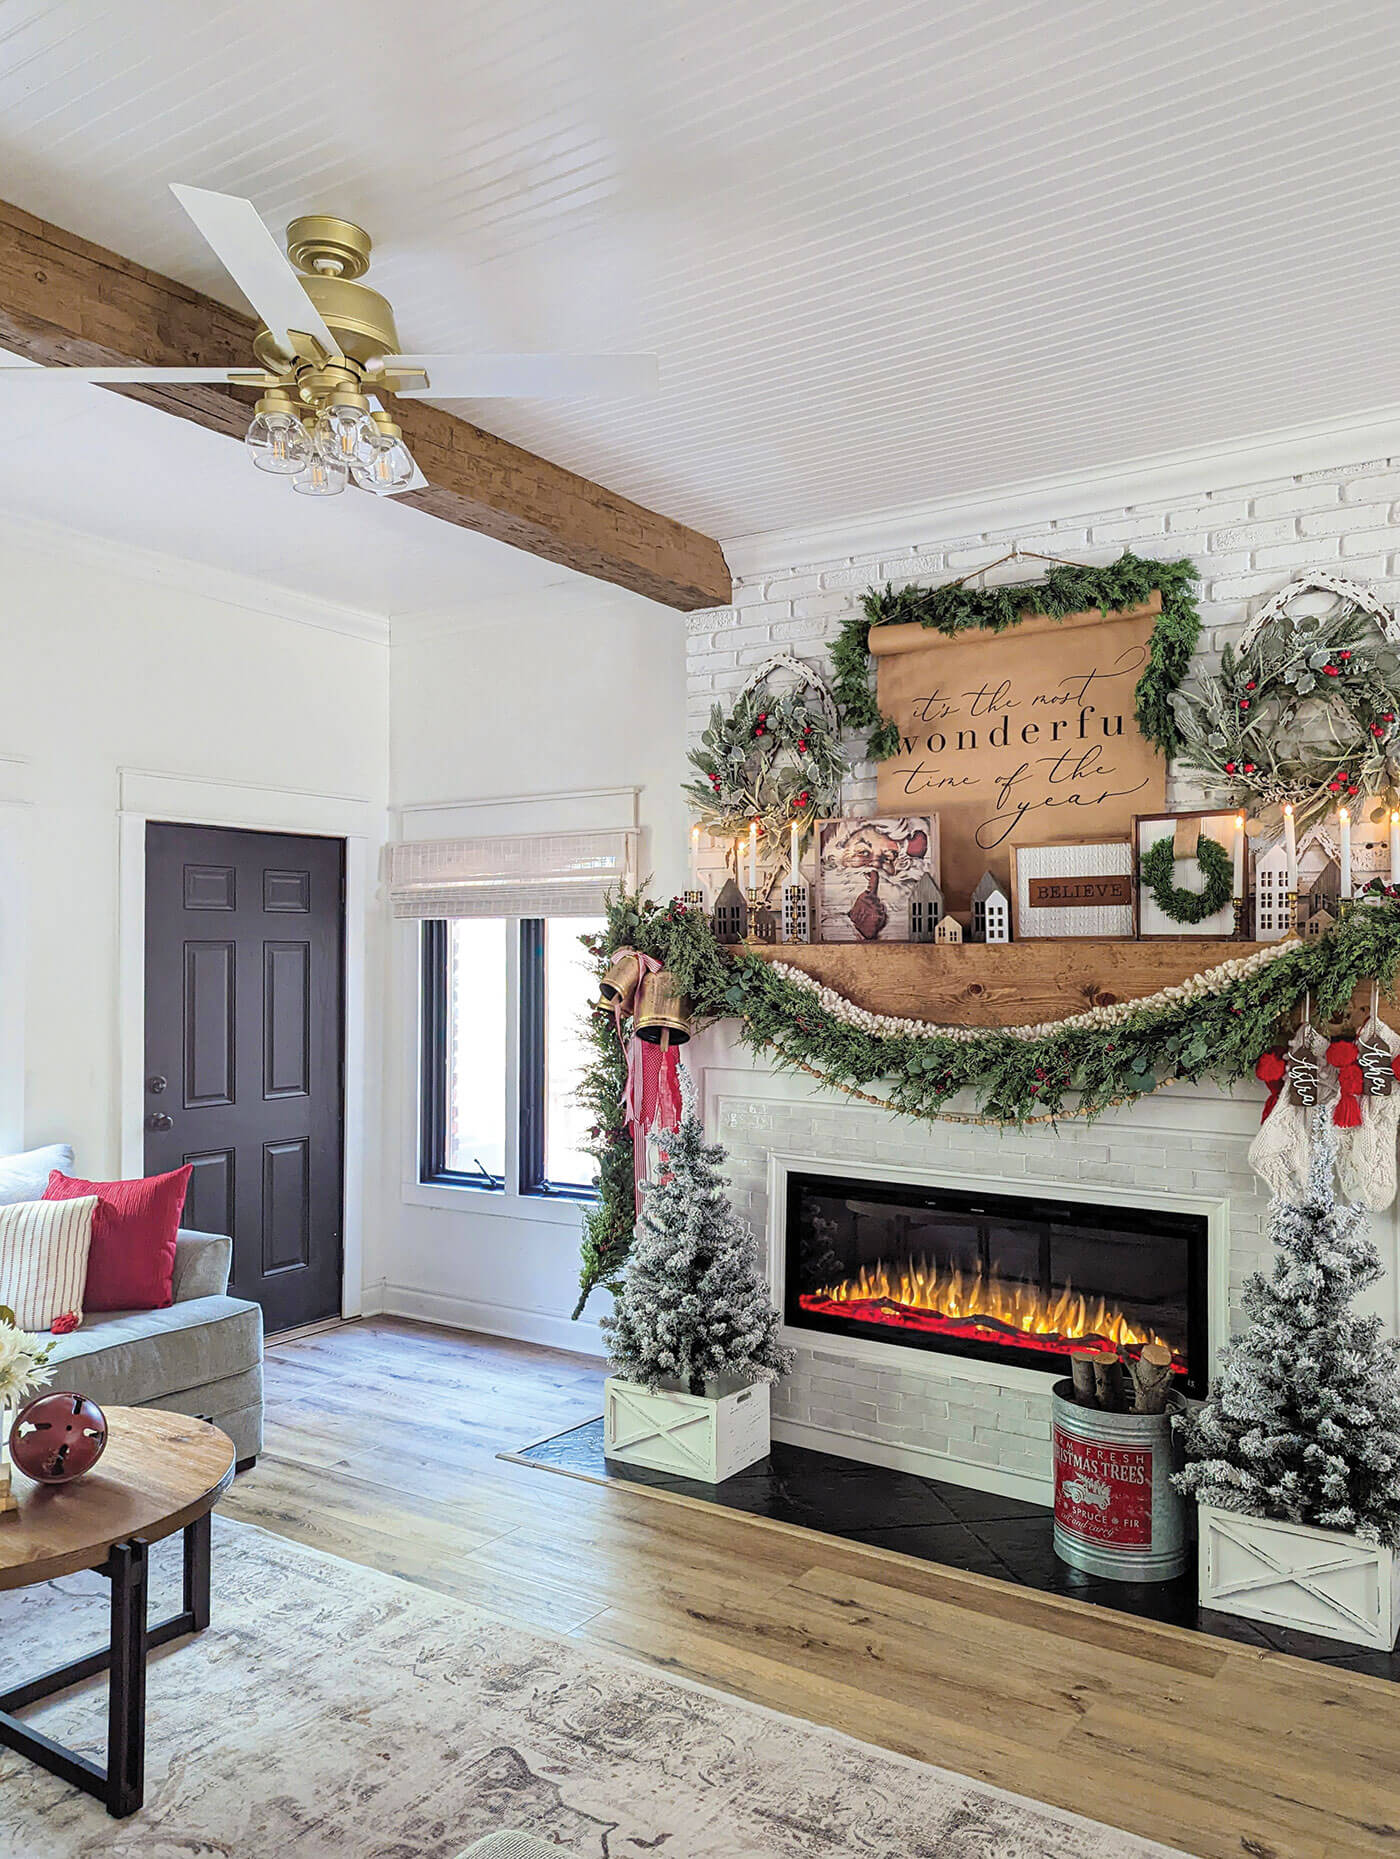 How to Decorate Your Ceiling with Faux Wood Beams